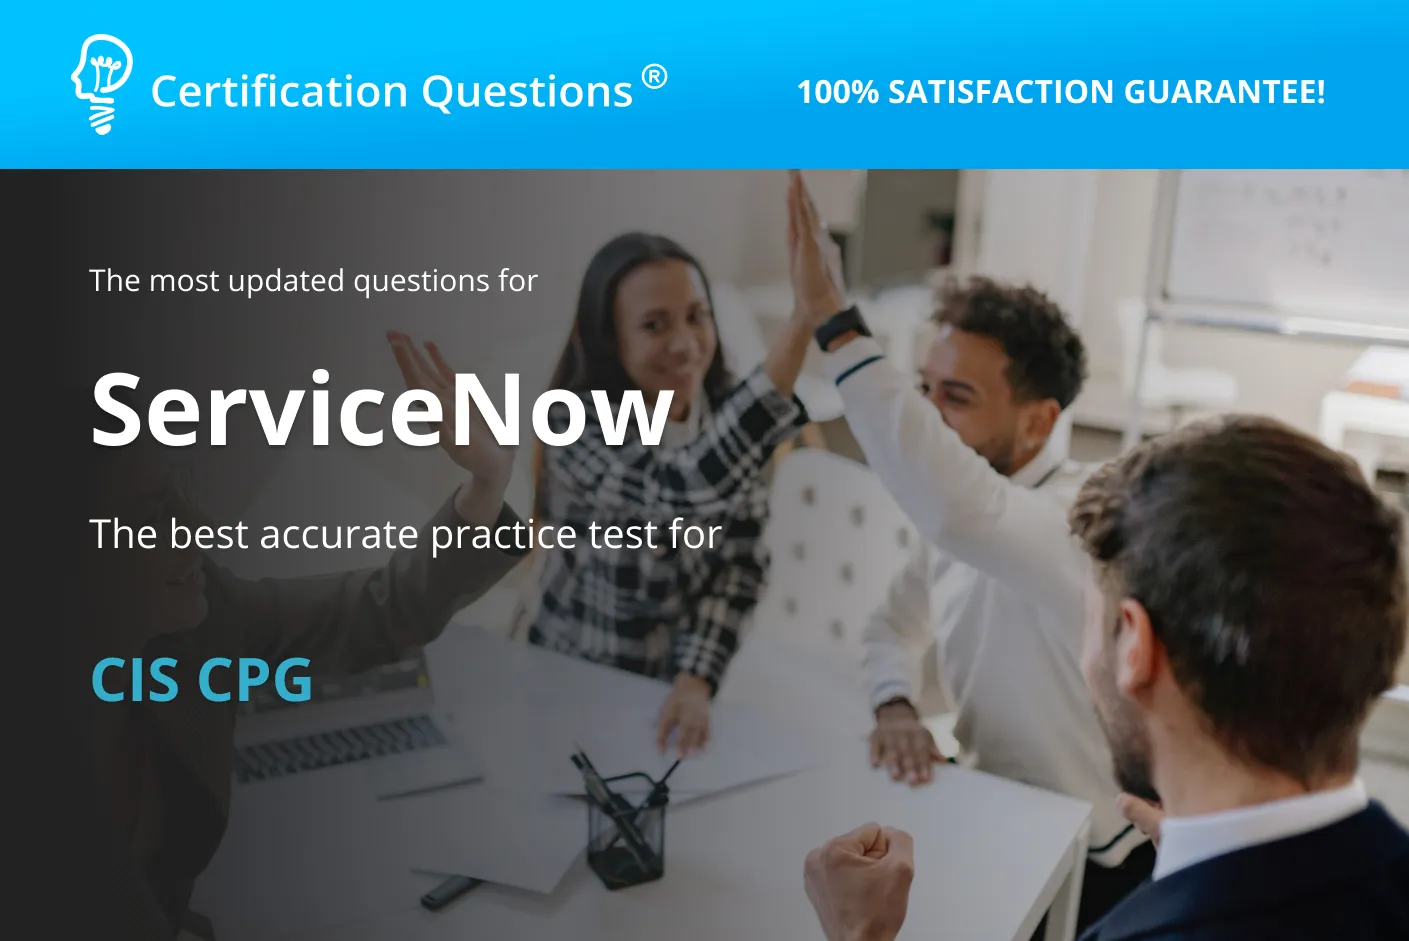 This image is related to Servicenow Cloud Provisioning and Governance Exam